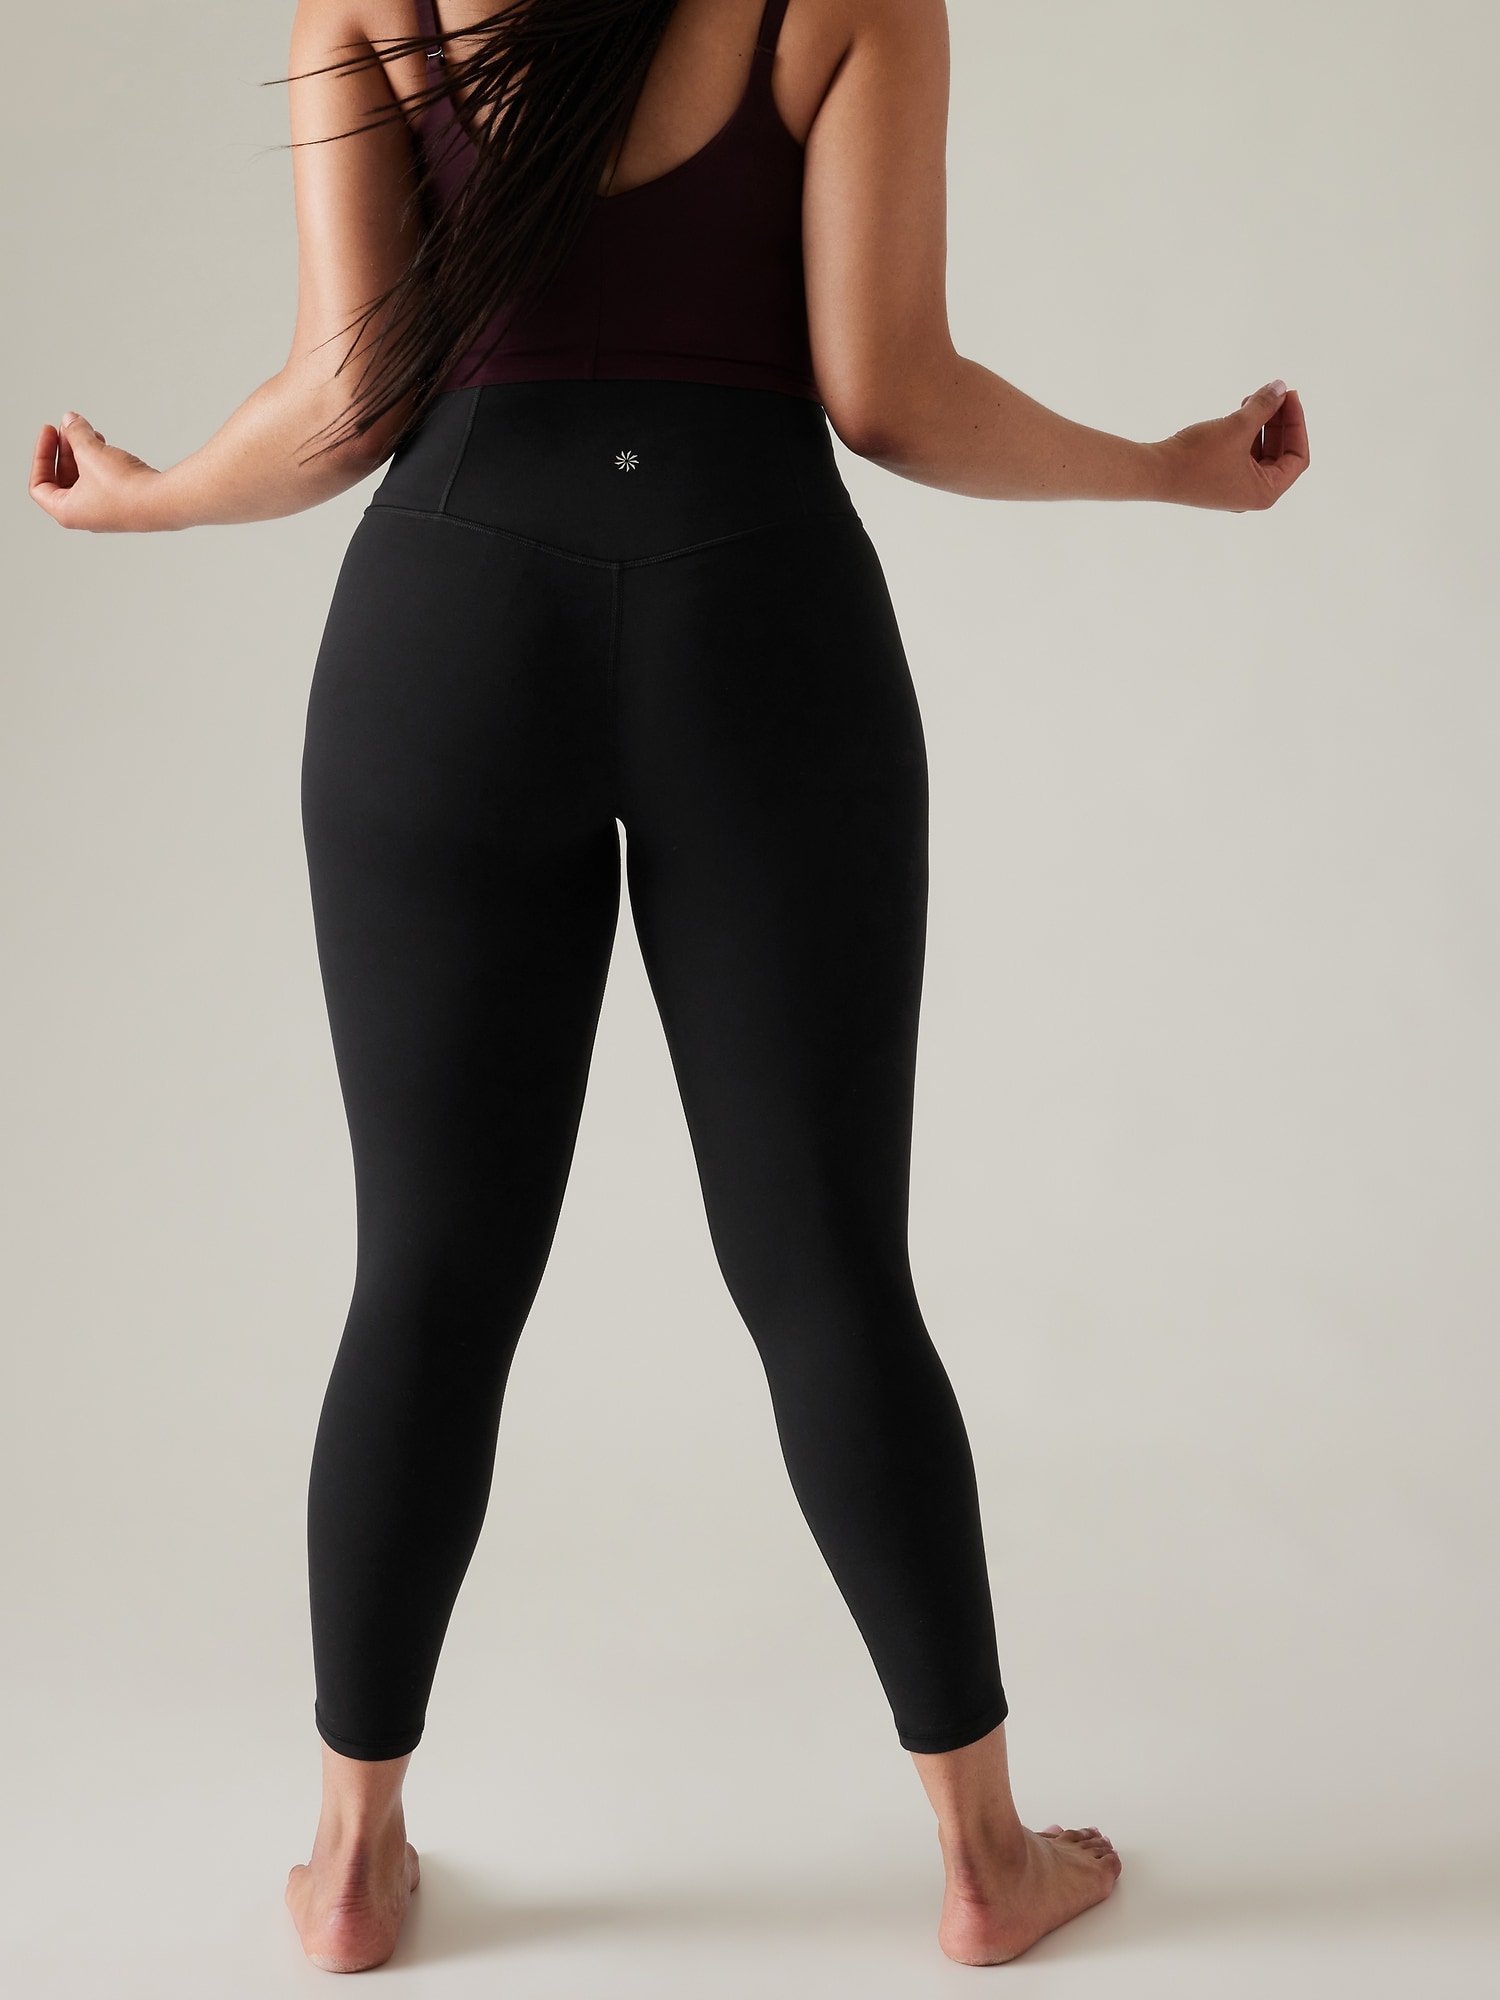 Seamless Leggings for Tall Women in Bright Navy Heather